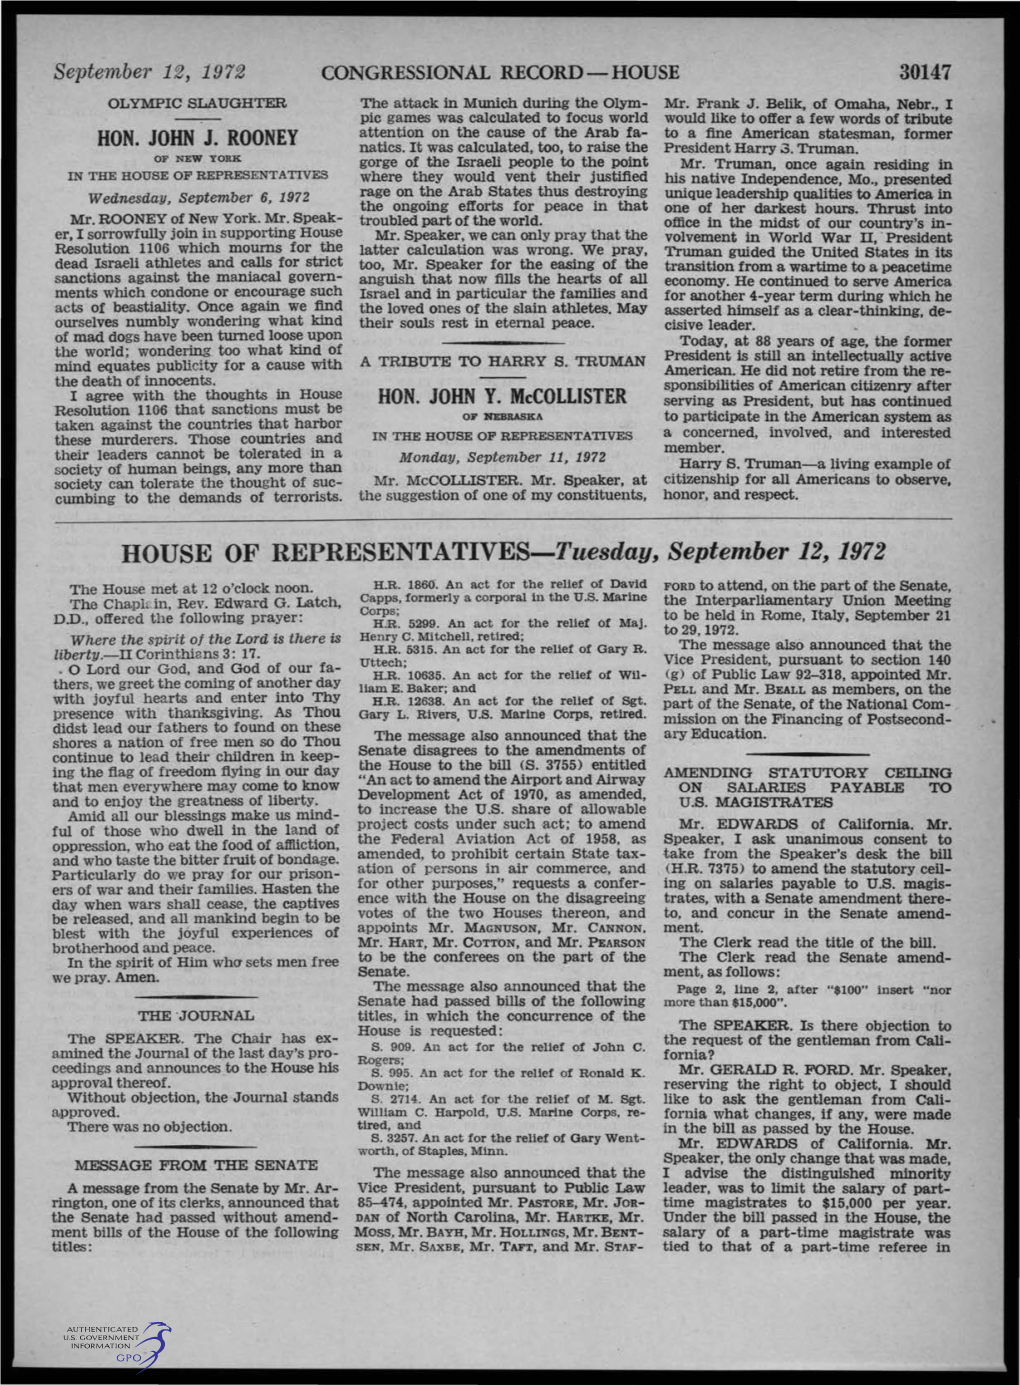 HOUSE of REPRESENTATIVES-Tuesday, September 12, 1972 the House Met at 12 O'clock Noon